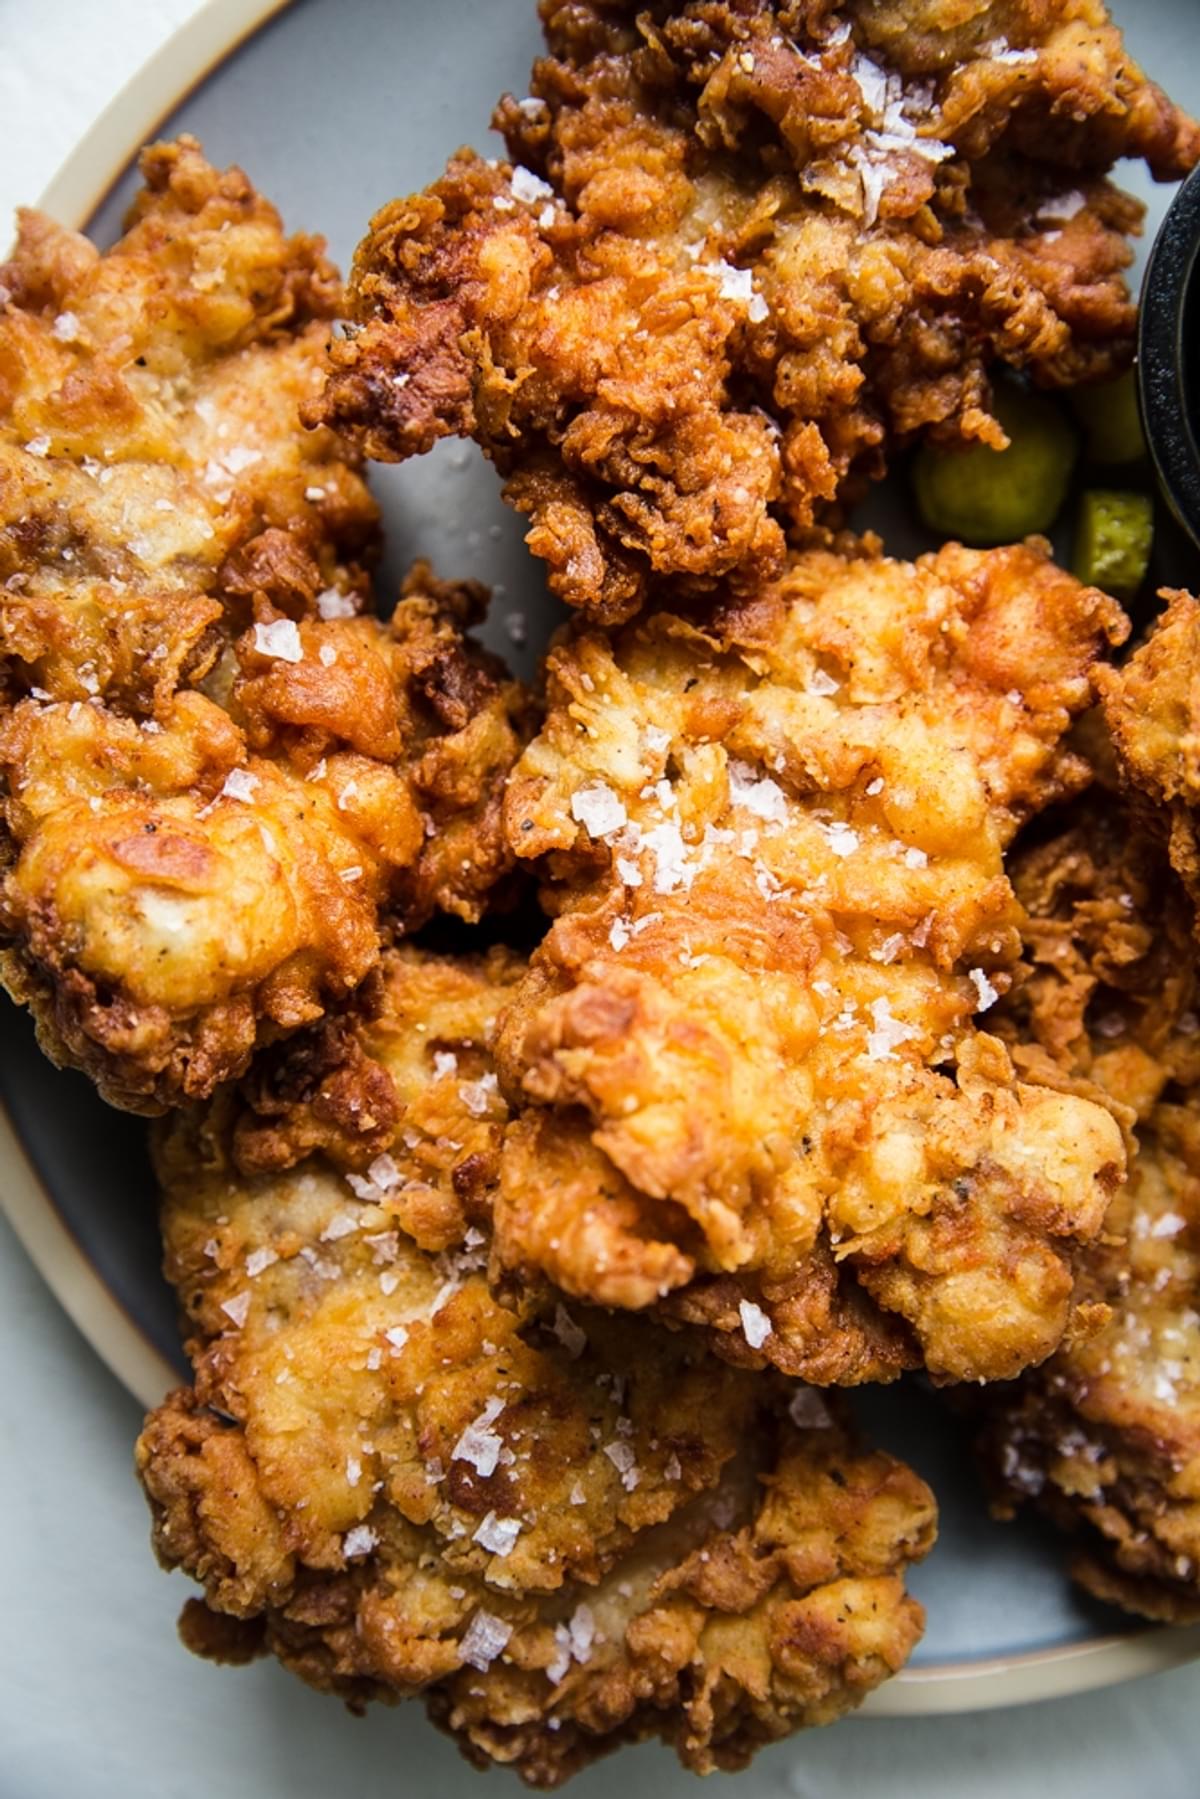 Fried chicken on a light blue platter shown close up topped with flaky salt.